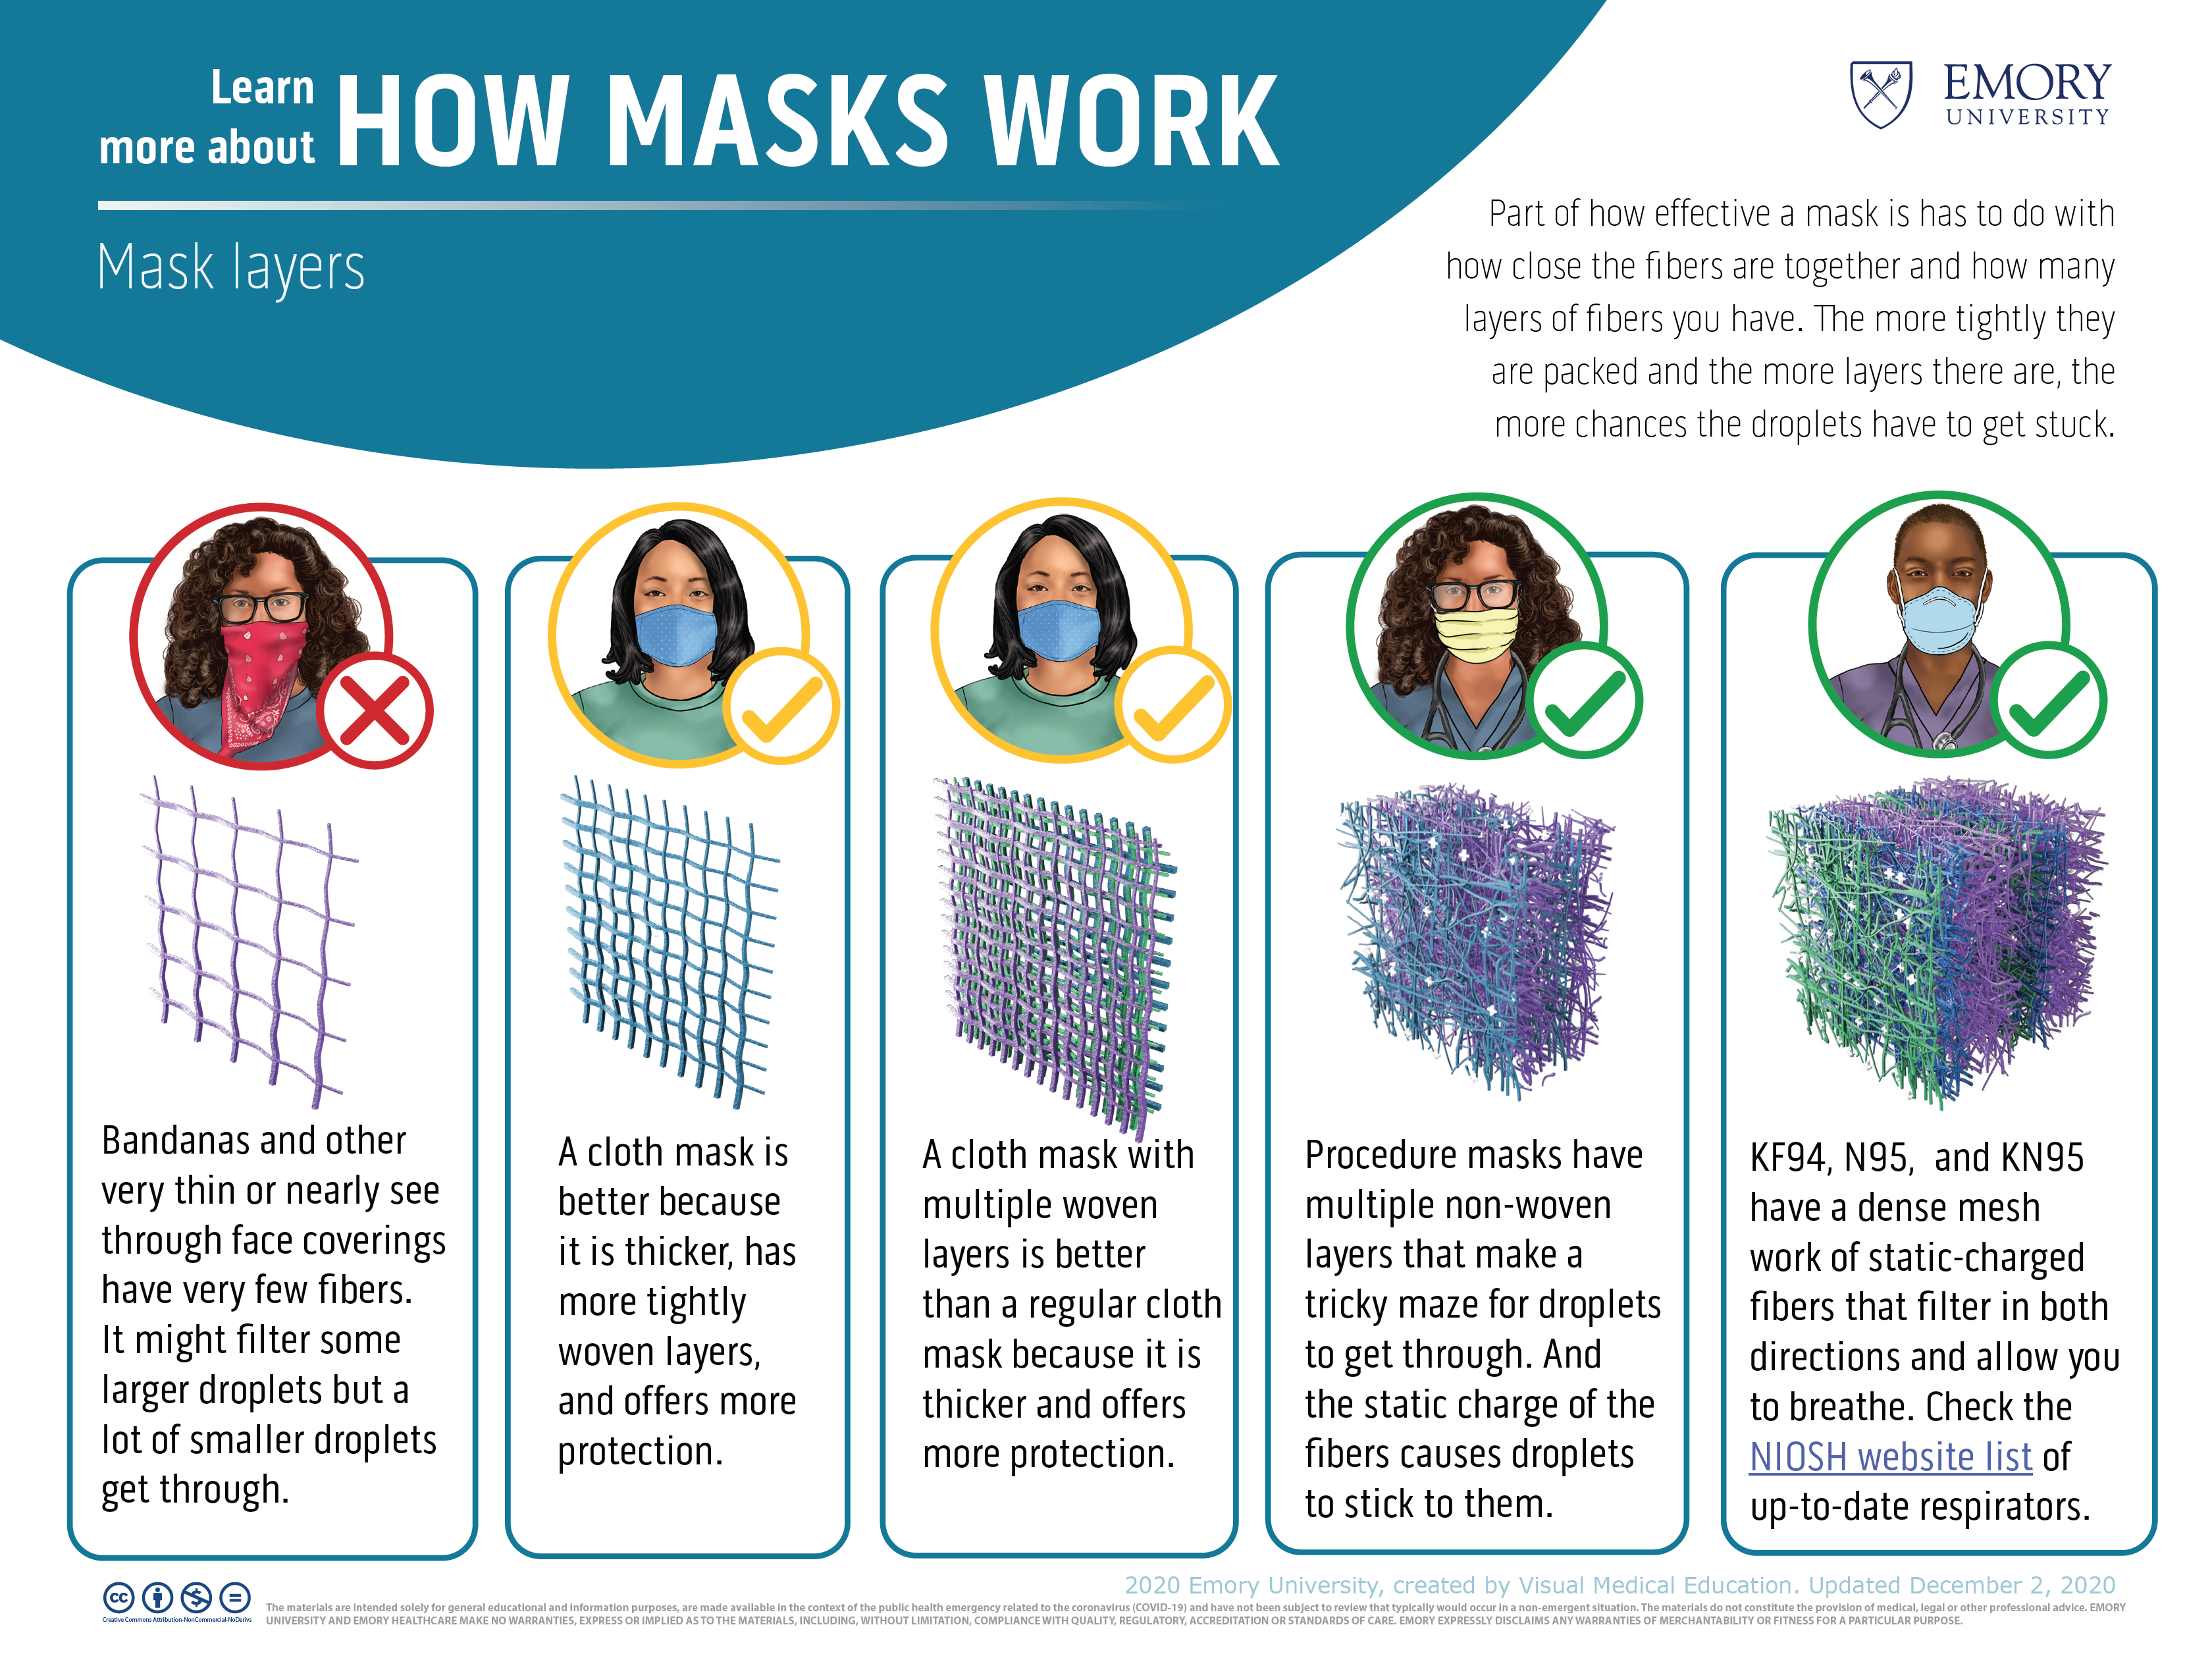 how masks filter out particles through different layers and densities of material